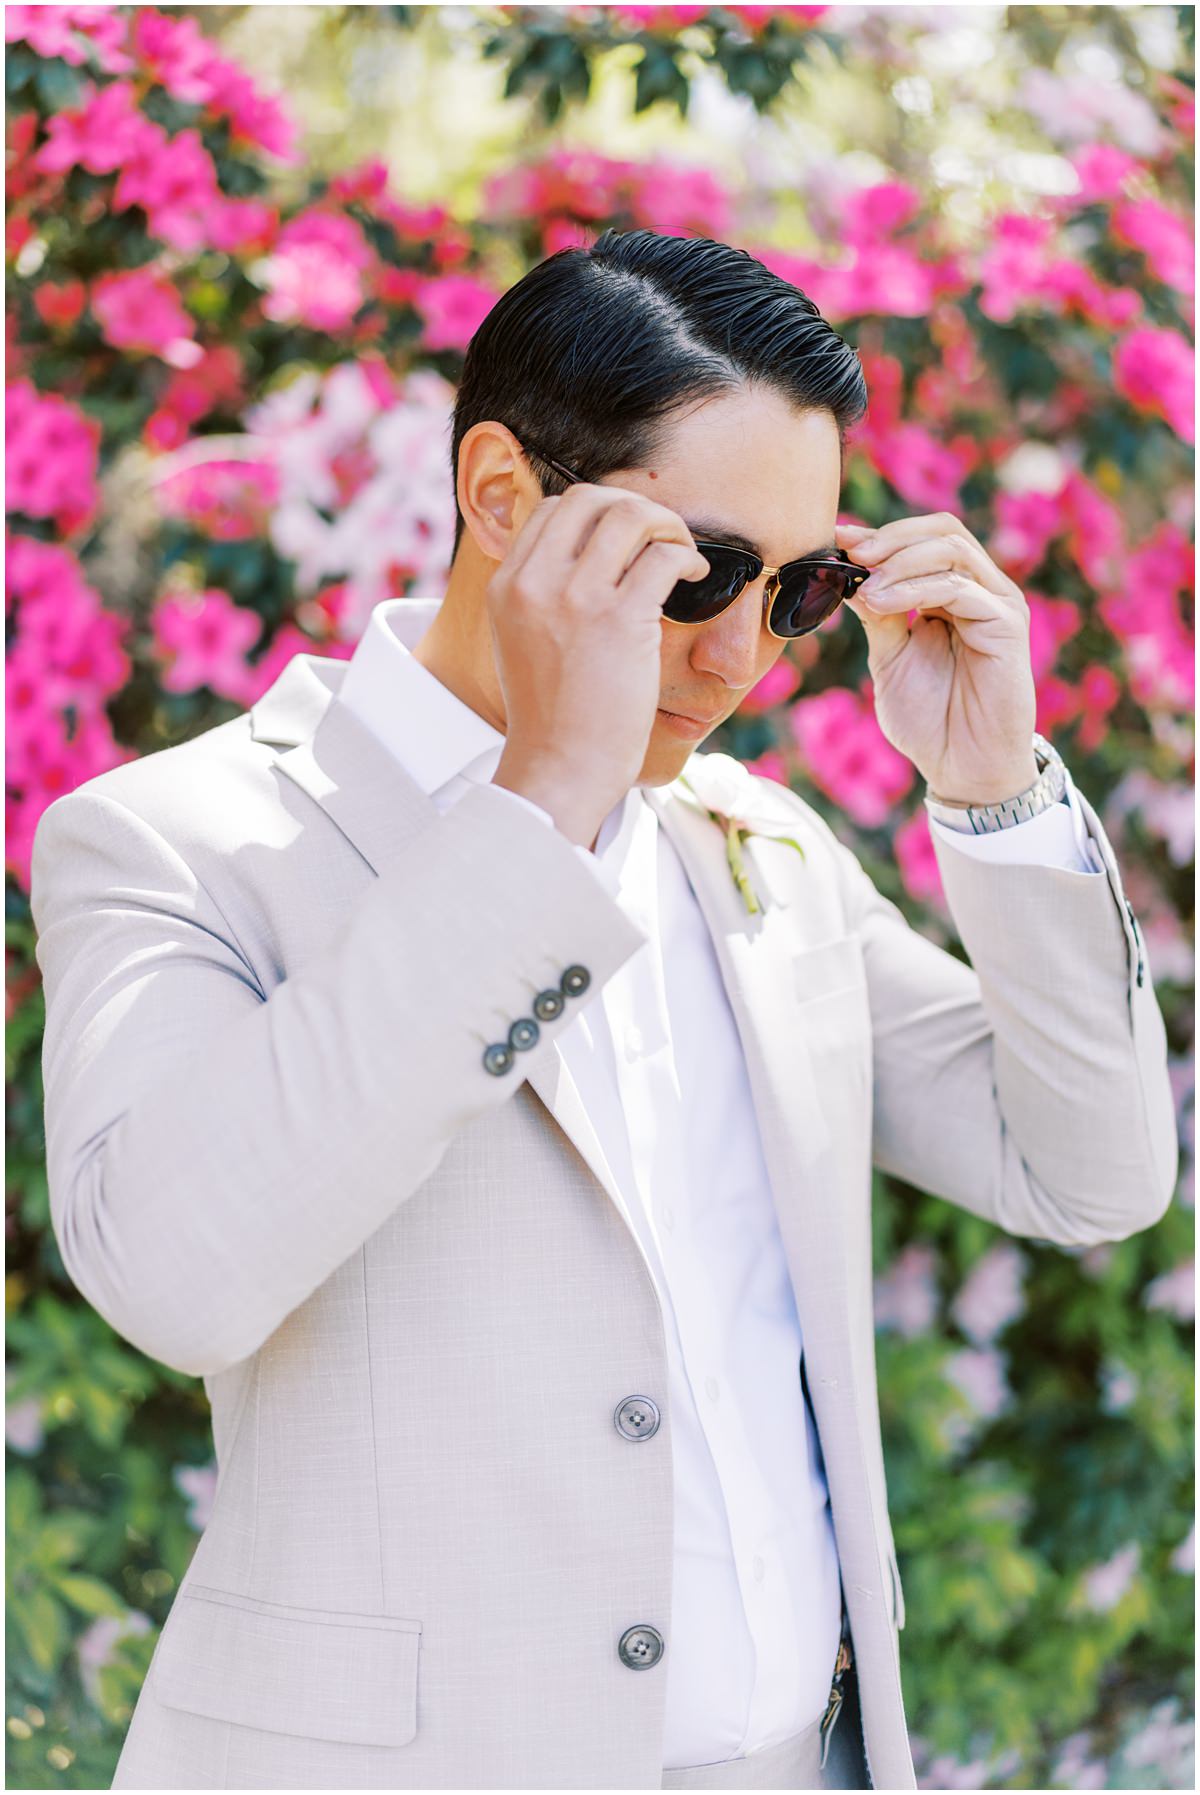 groom suit ideas to show off his style and personality